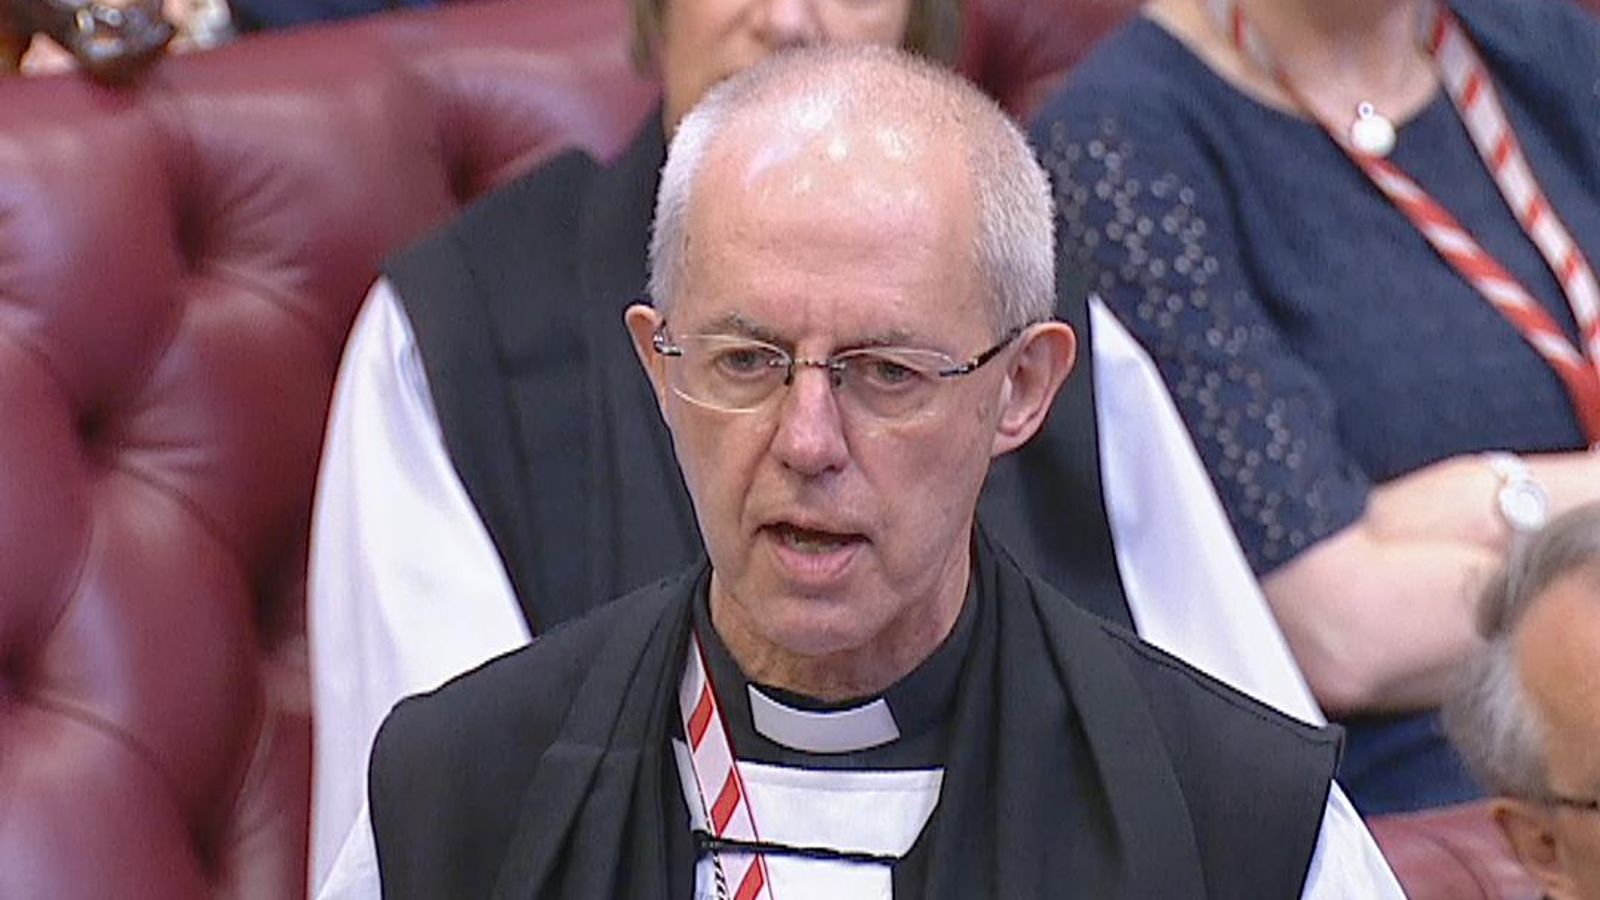 Illegal Migration Bill has ‘too many problems for one speech’ – Archbishop of Canterbury | Politics News